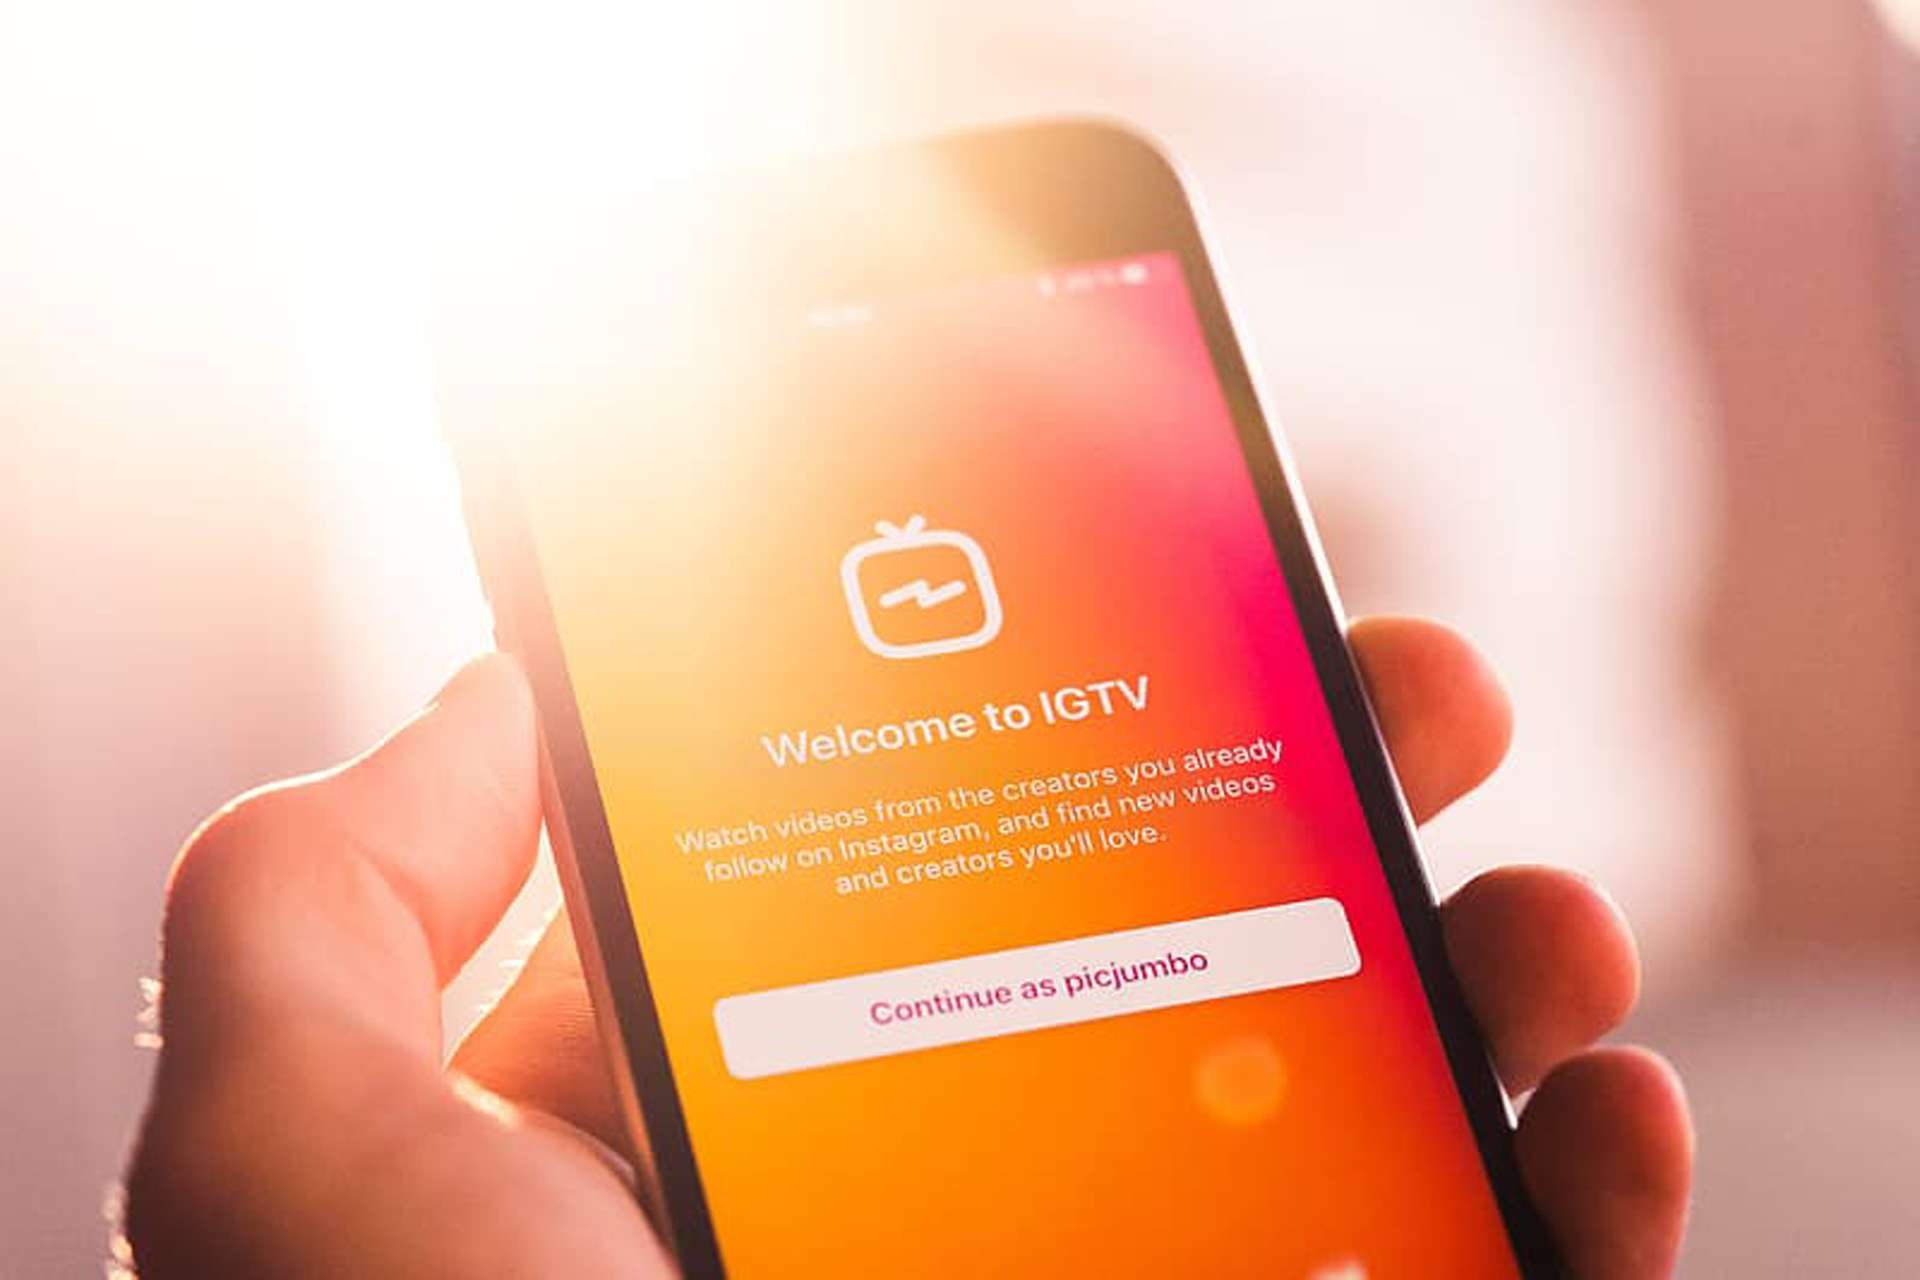 Instagram makes changes to IGTV service